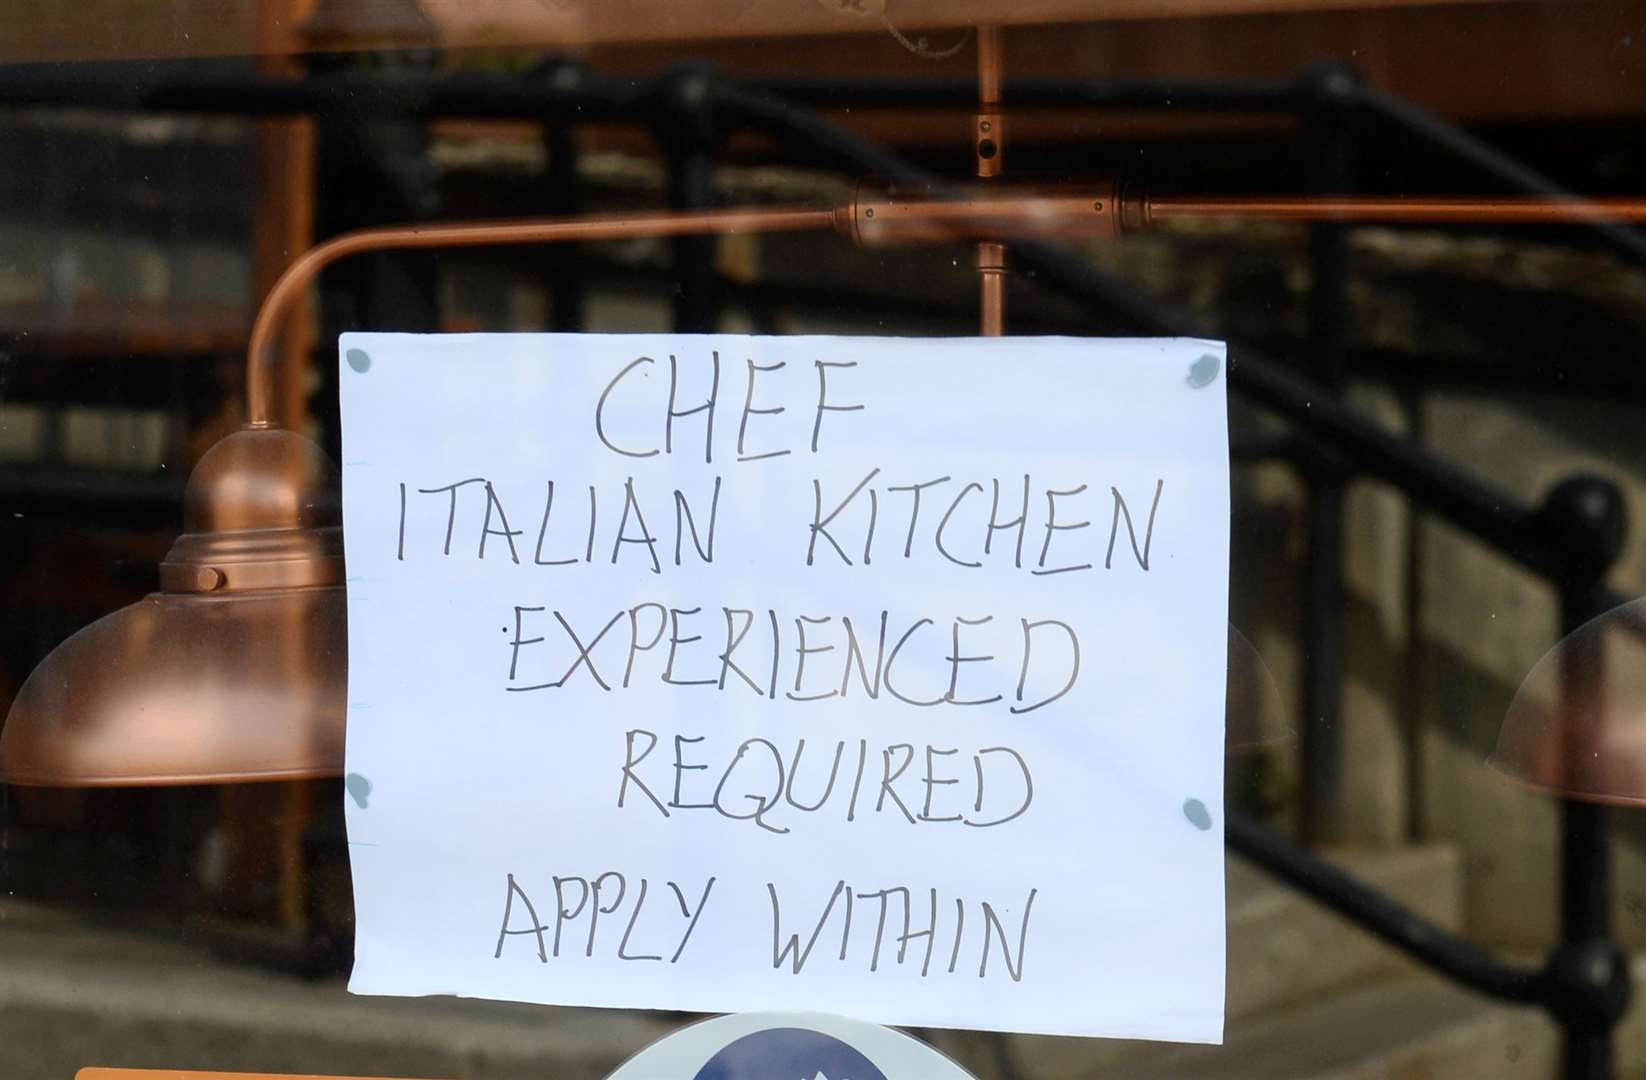 Little Italy in Stephens Brae, Inverness, is advertising for a chef.